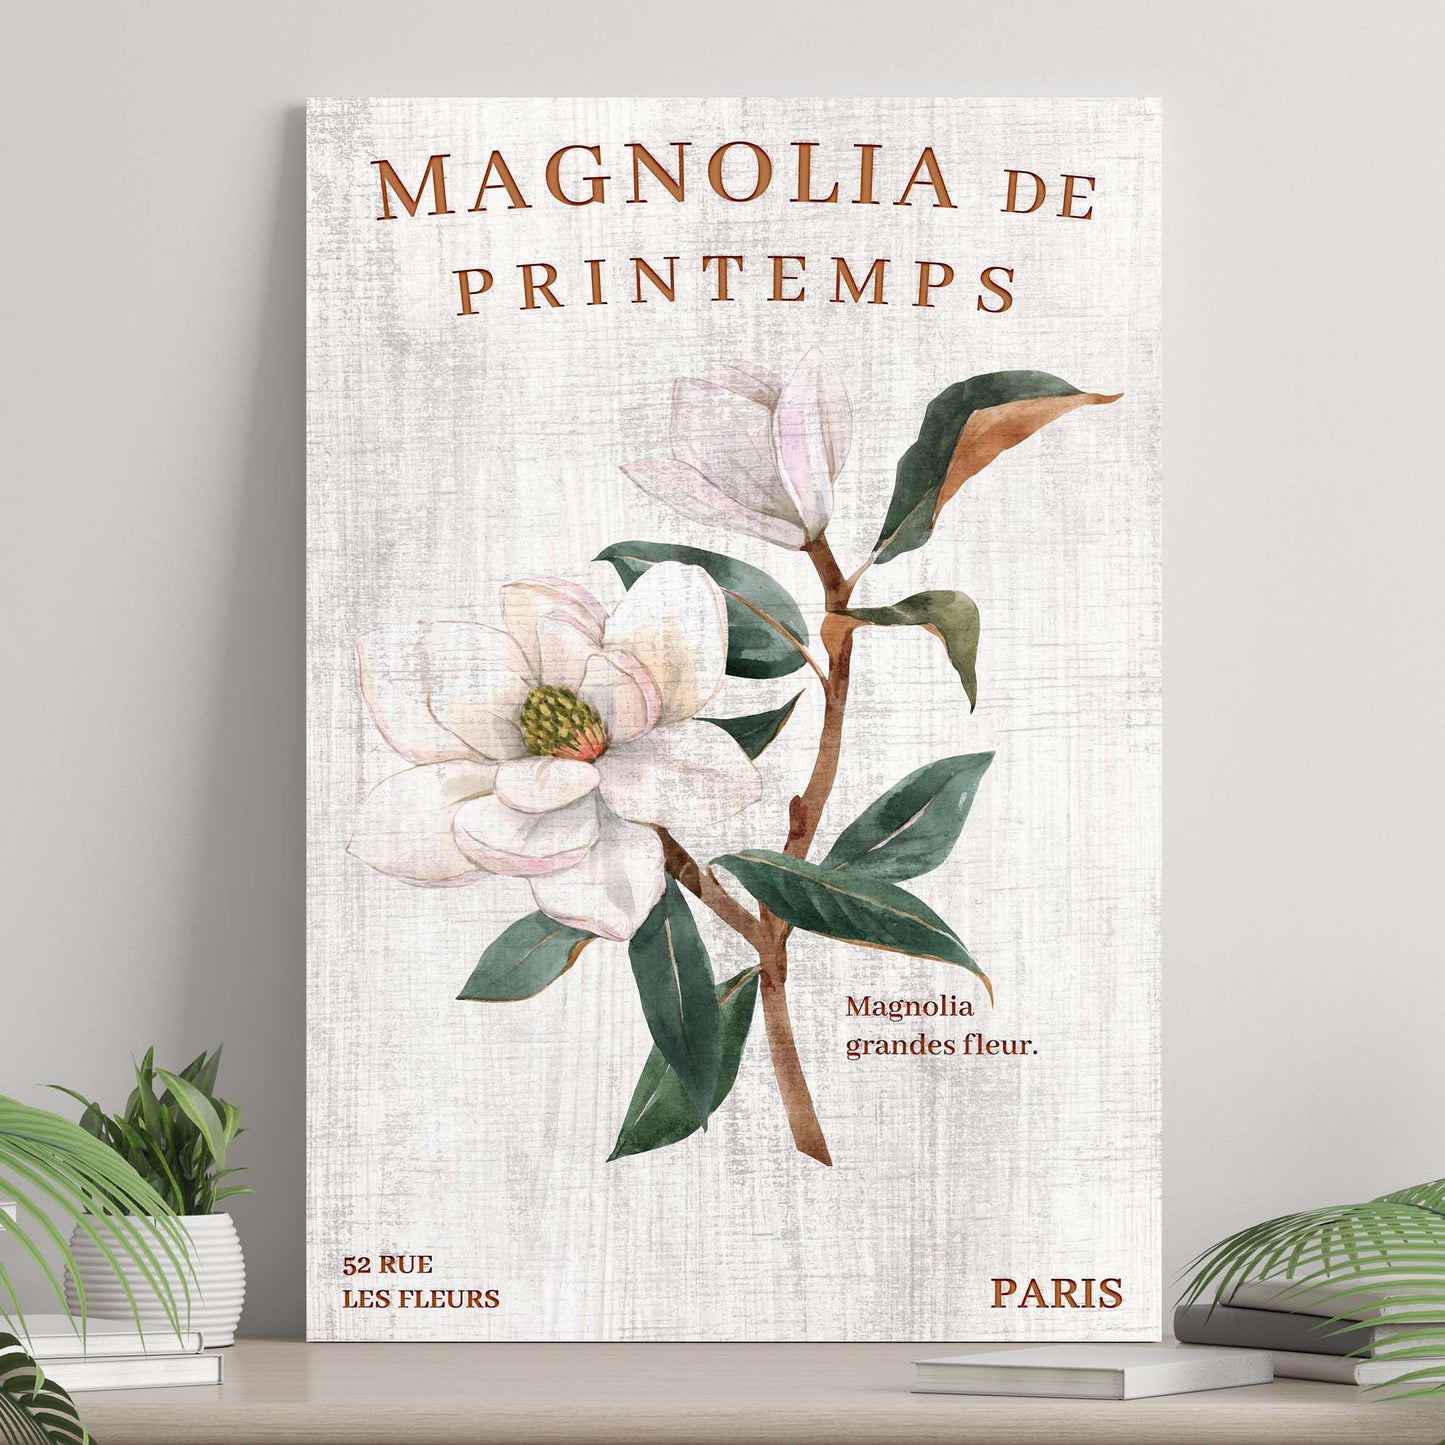 Magnolia De Printemps Sign II - Image by Tailored Canvases